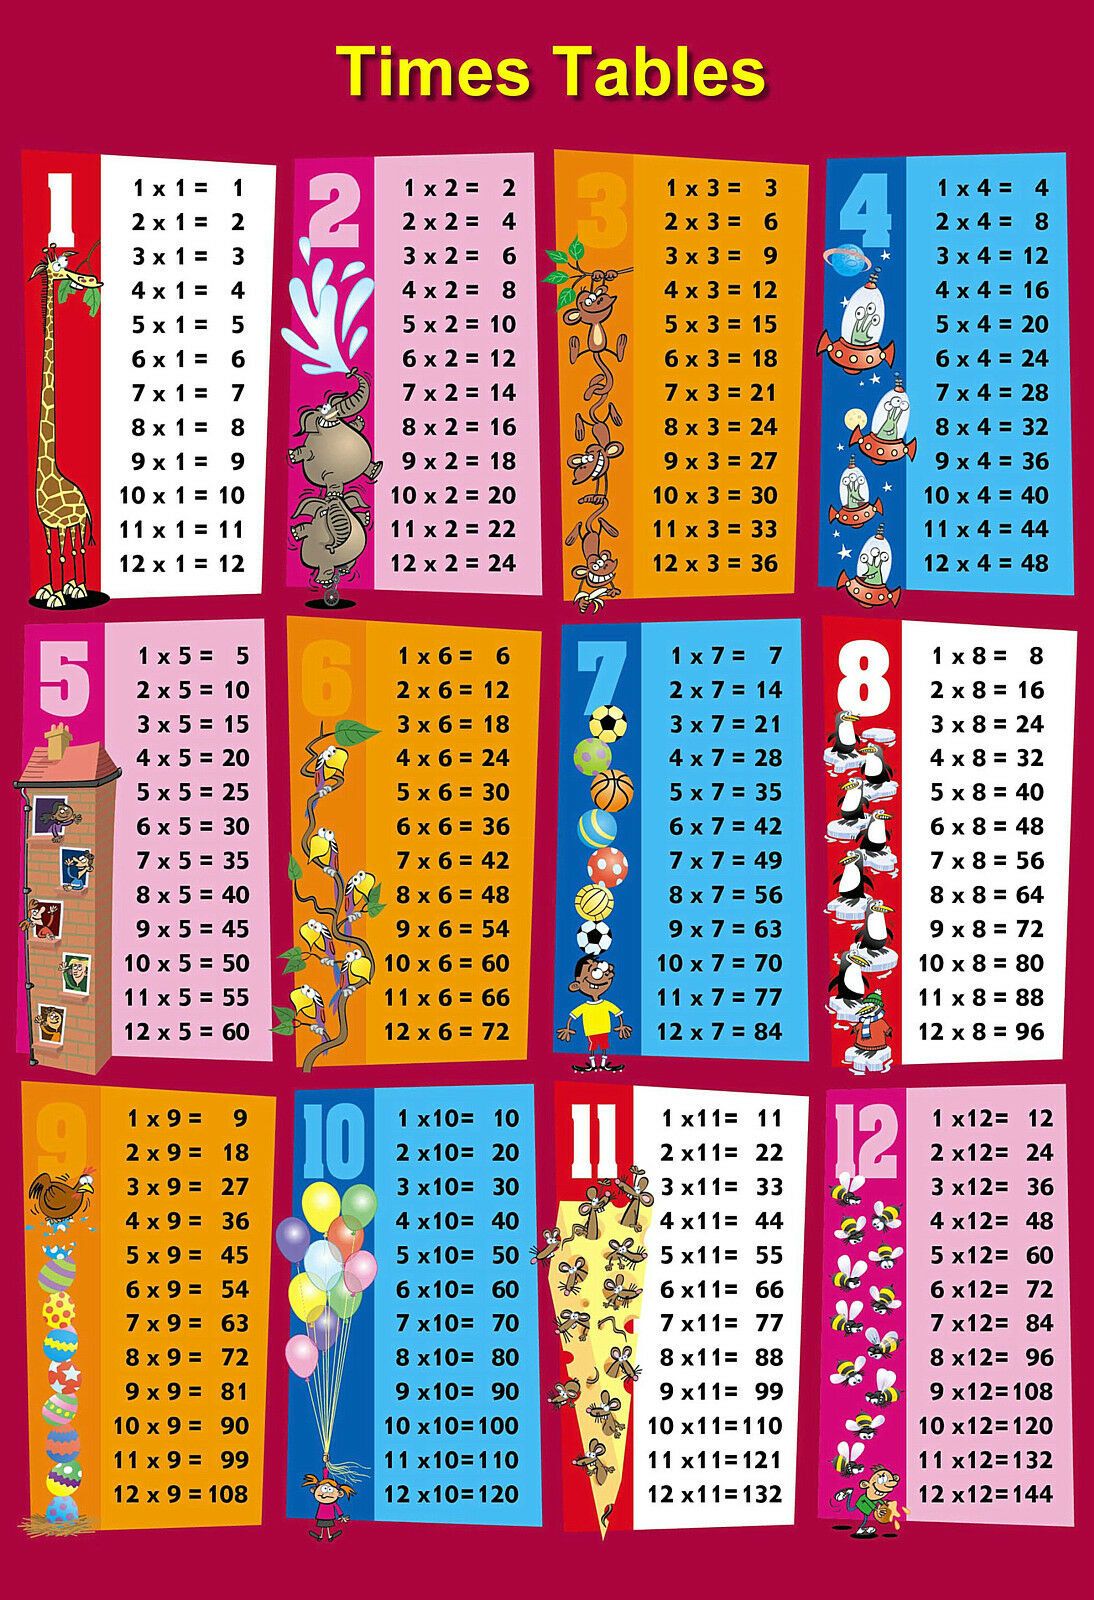 4 times table chart up to 20